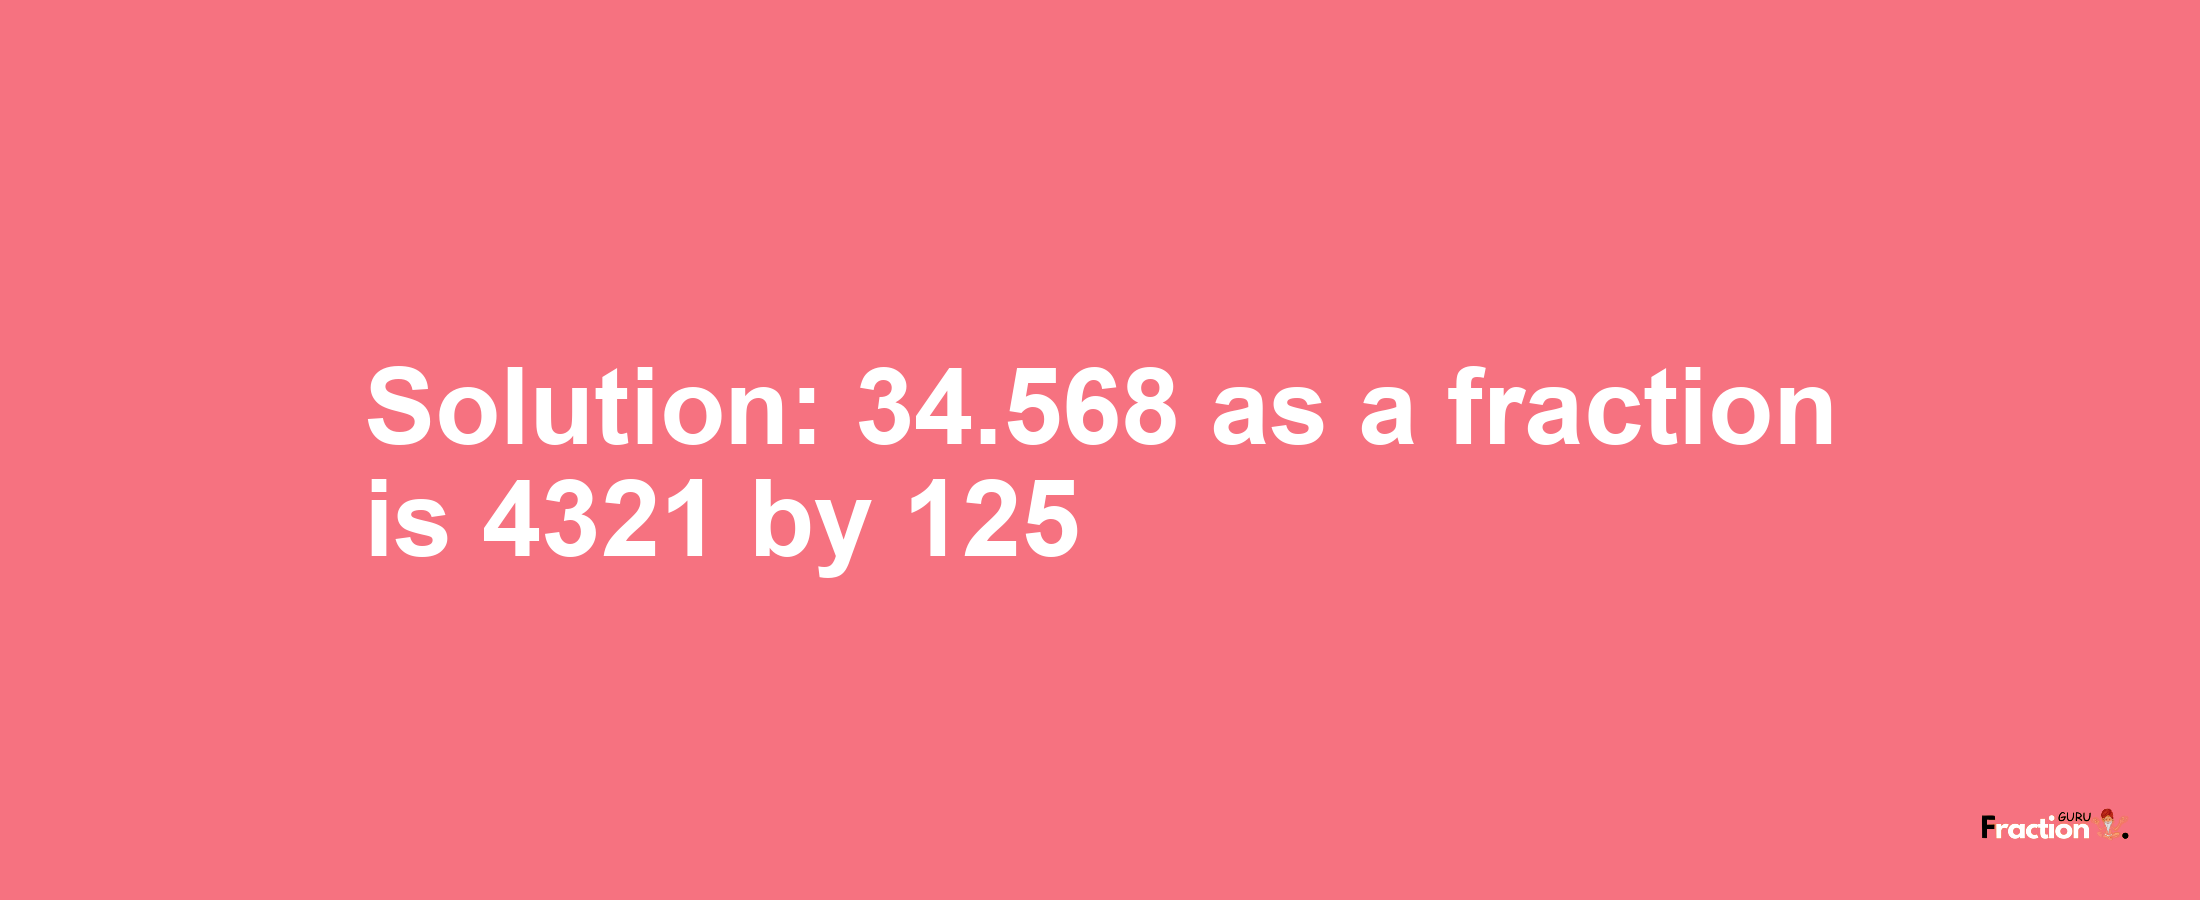 Solution:34.568 as a fraction is 4321/125